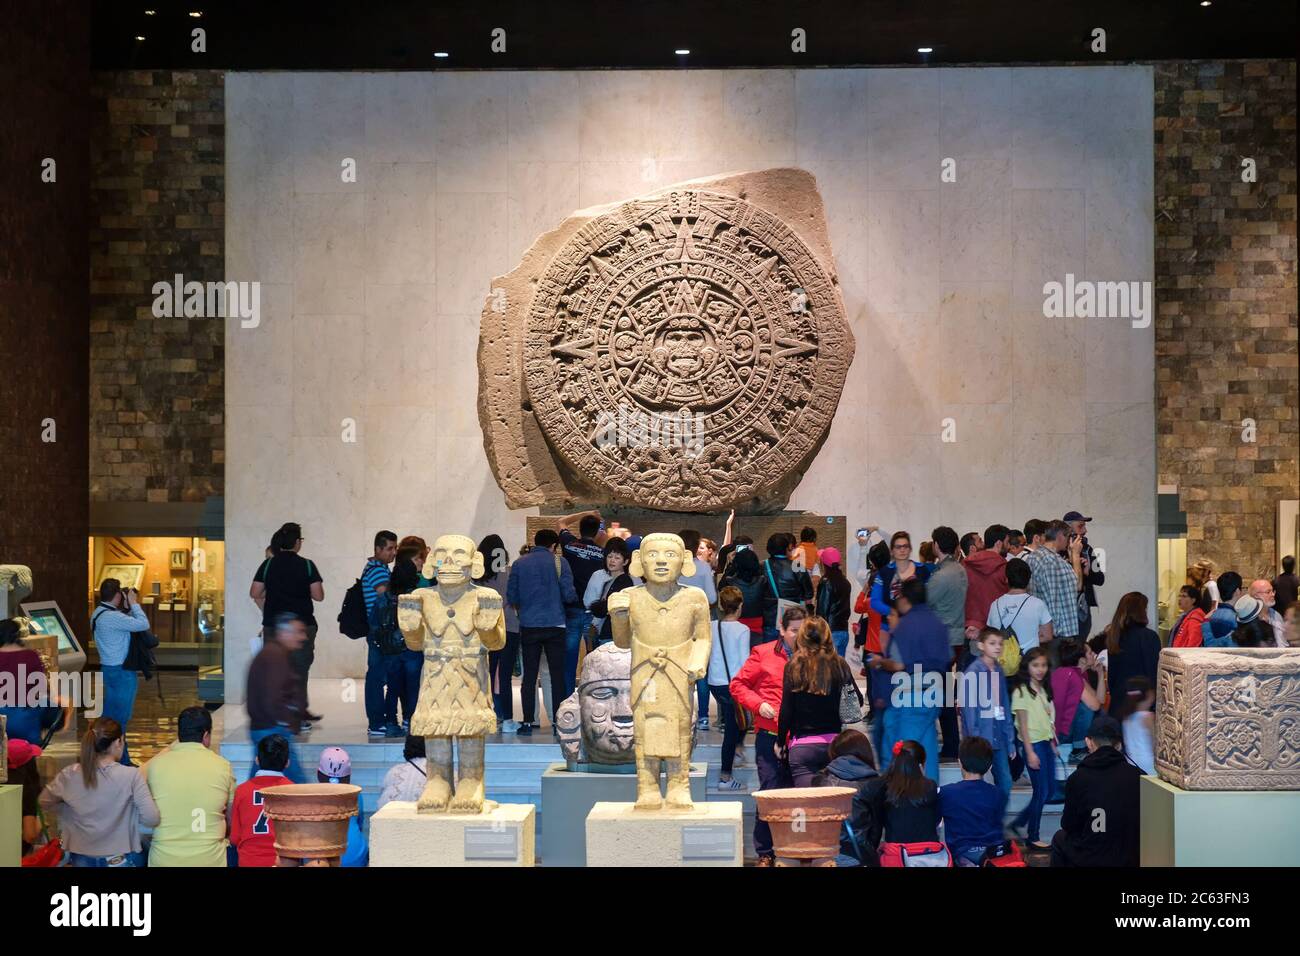 The Aztec Calendar or Stone of the Sun at the National Museum of Anthropology  in Mexico City Stock Photo